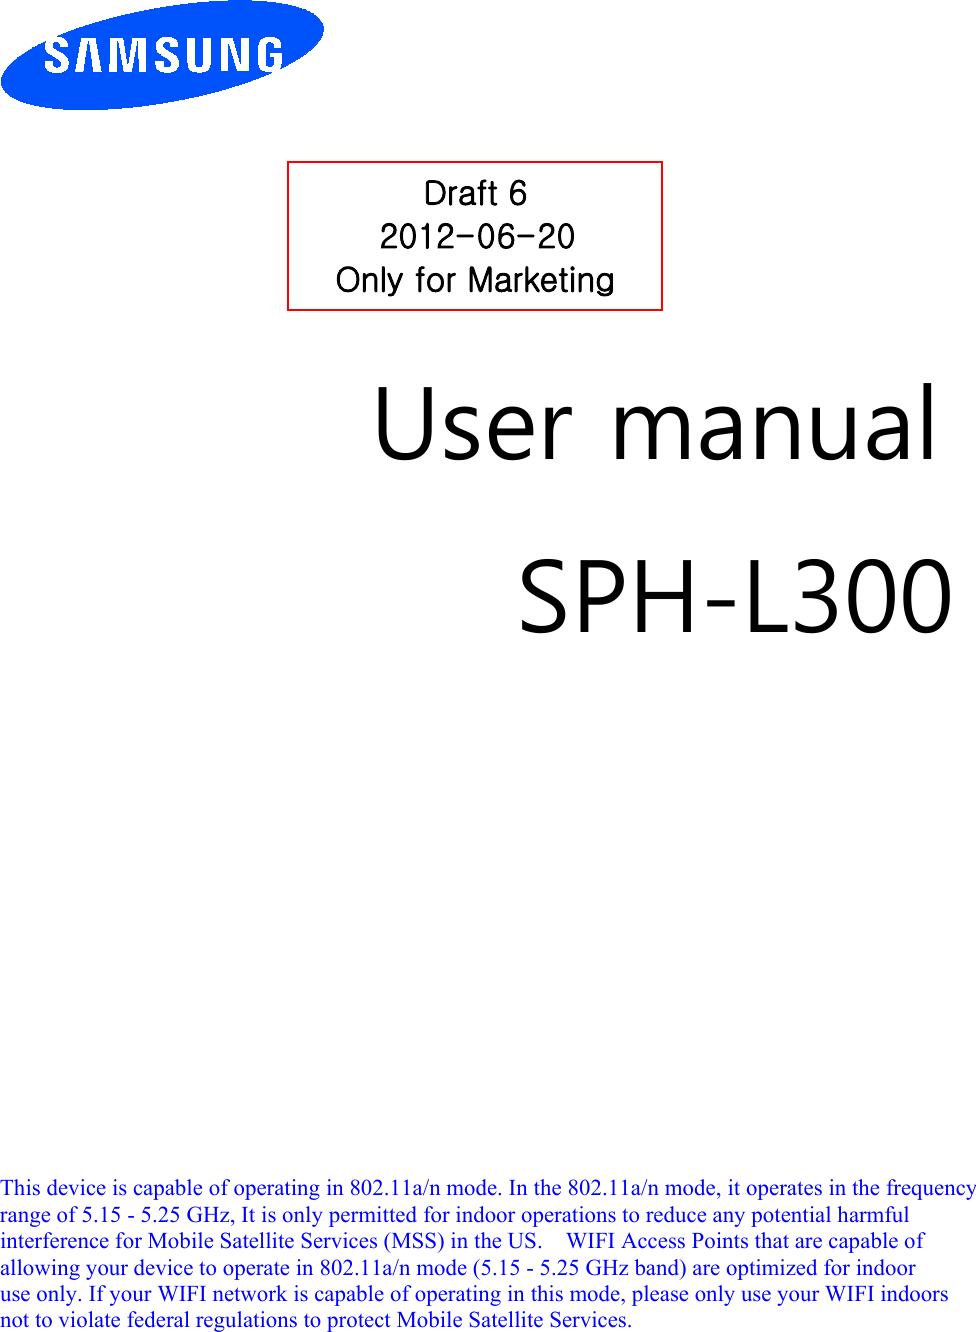         User manual SPH-L300                This device is capable of operating in 802.11a/n mode. In the 802.11a/n mode, it operates in the frequency   range of 5.15 - 5.25 GHz, It is only permitted for indoor operations to reduce any potential harmful   interference for Mobile Satellite Services (MSS) in the US.    WIFI Access Points that are capable of   allowing your device to operate in 802.11a/n mode (5.15 - 5.25 GHz band) are optimized for indoor   use only. If your WIFI network is capable of operating in this mode, please only use your WIFI indoors not to violate federal regulations to protect Mobile Satellite Services.        Draft 6 2012-06-20 Only for Marketing 